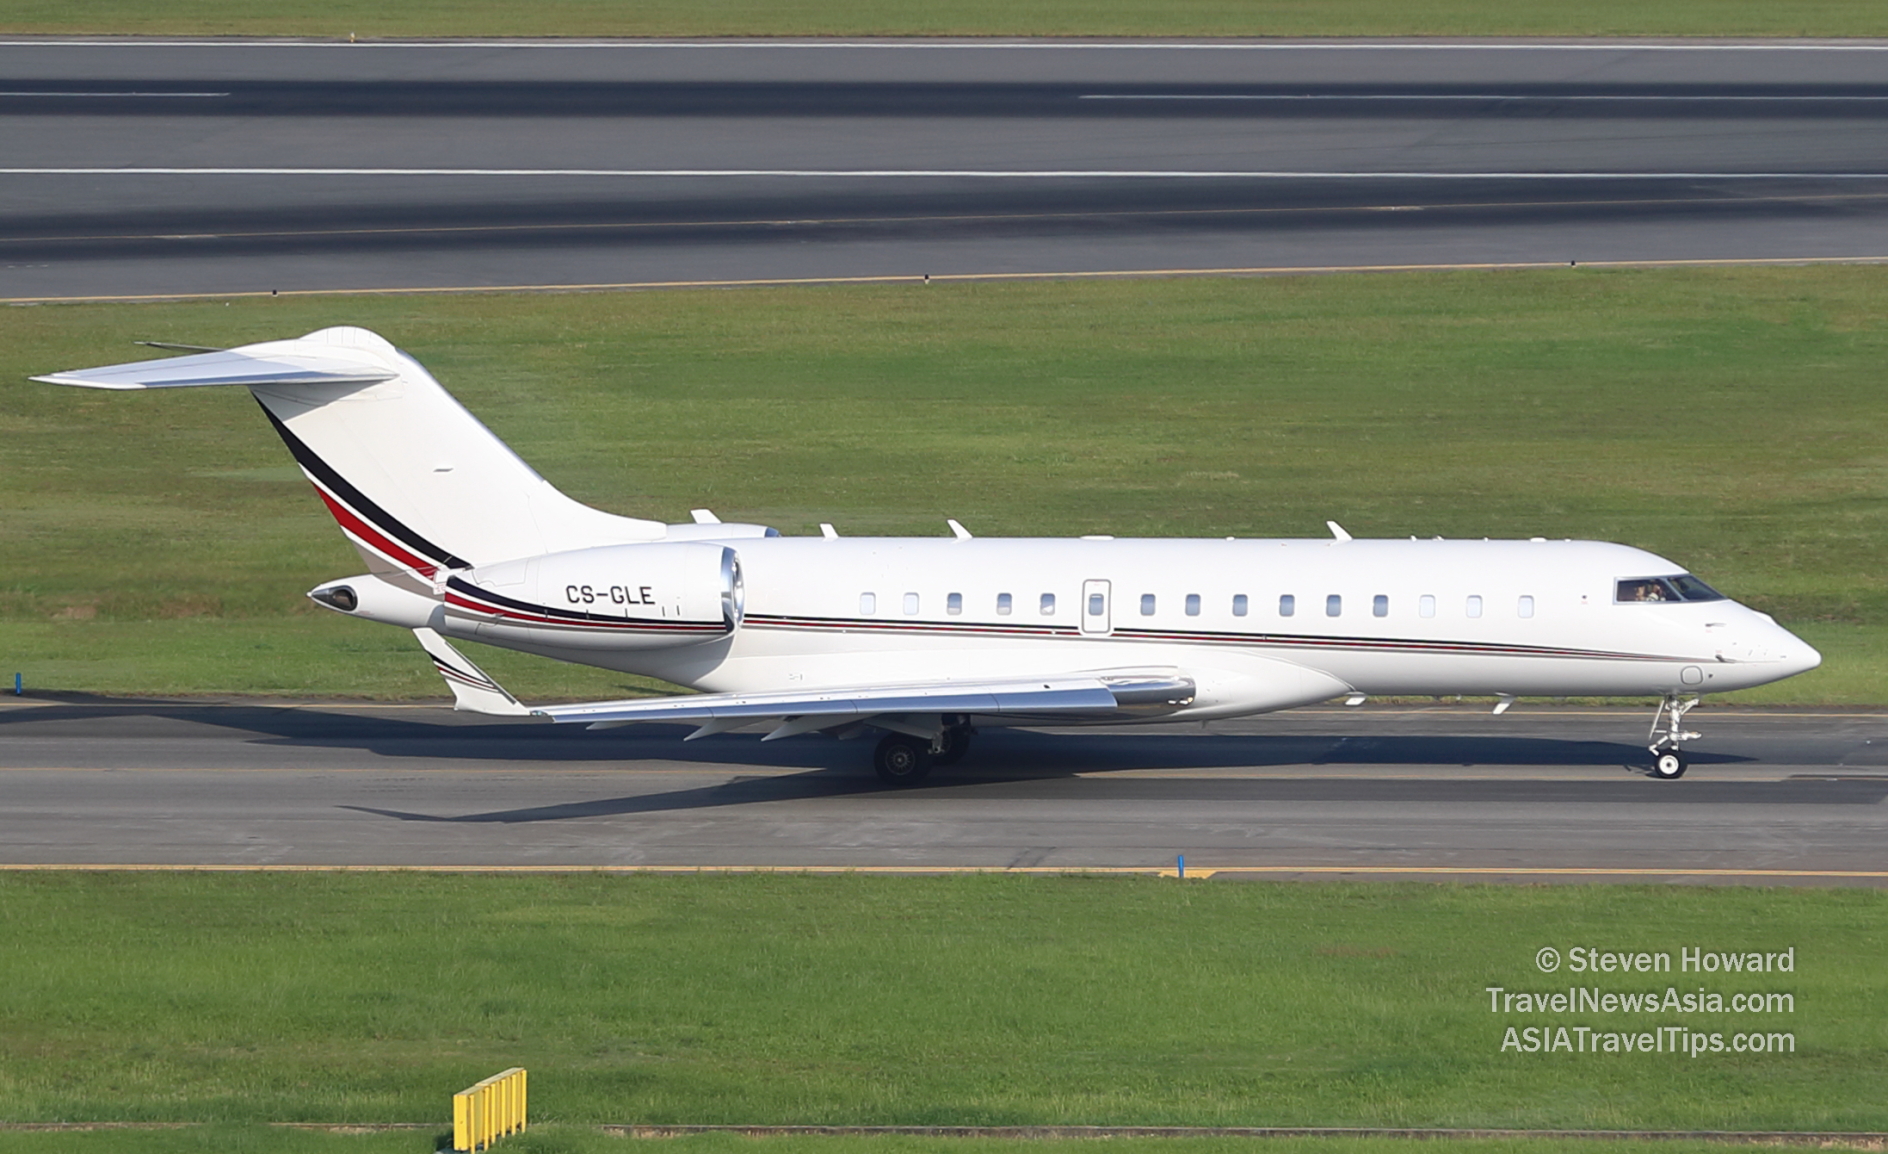 Bombardier Global 6000 at SIN. Picture by Steven Howard of TravelNewsAsia.com Click to enlarge.